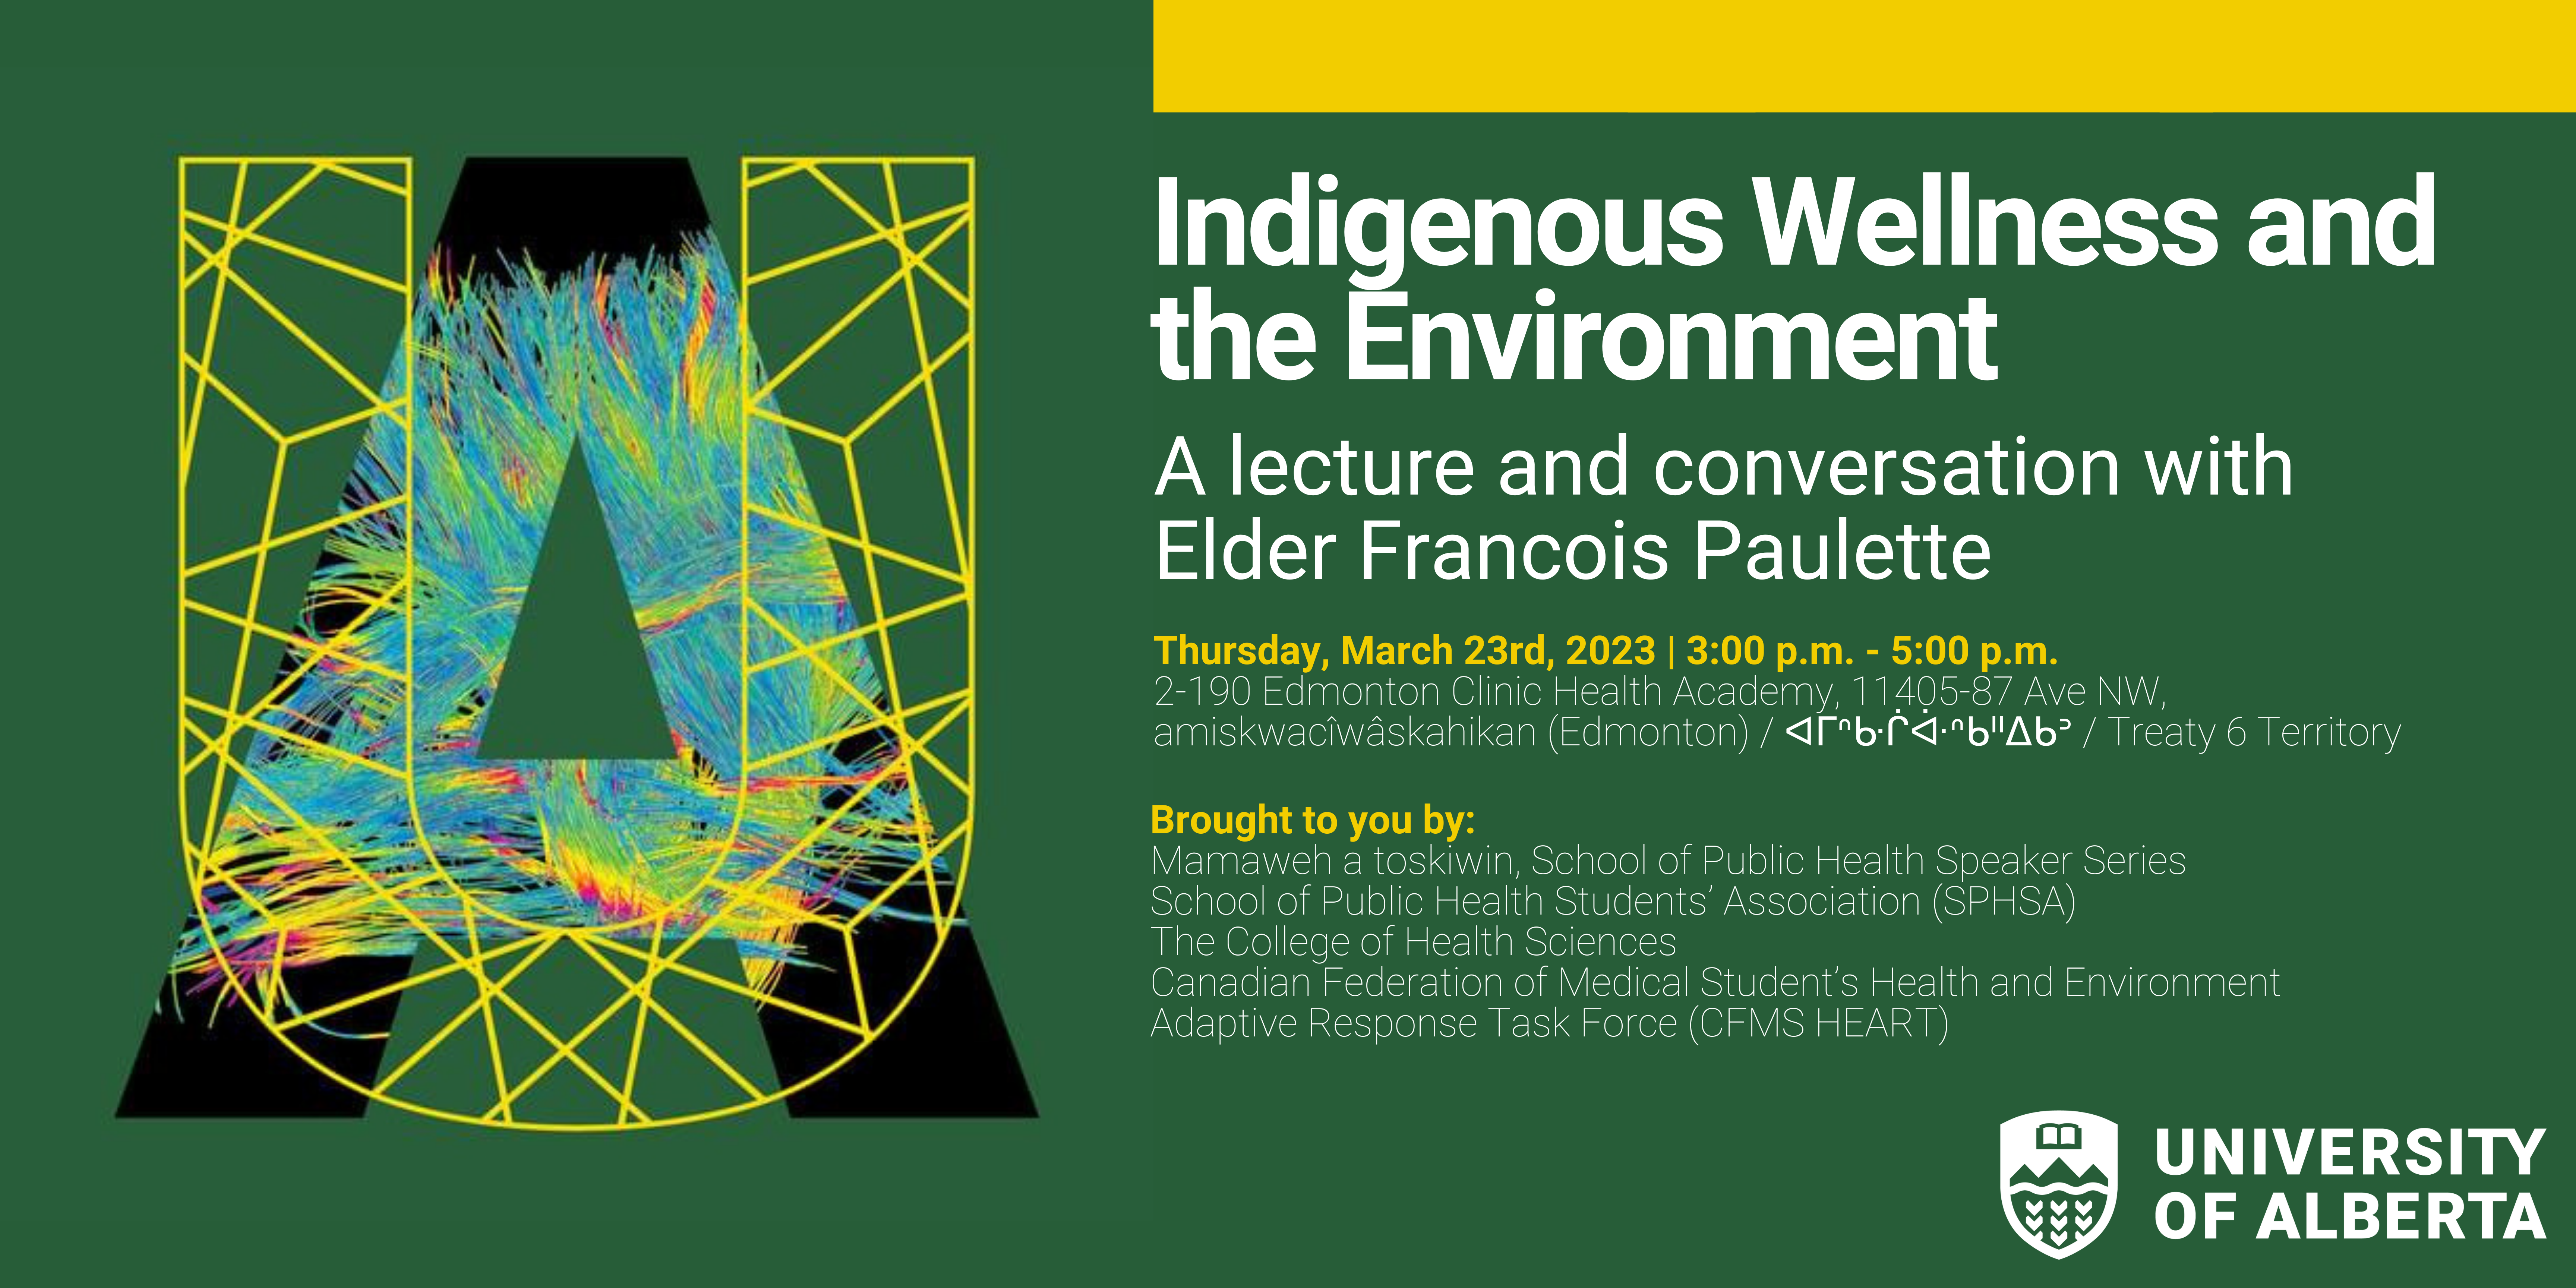 Promotional flyer reads Indigenous Wellness and the Environment: a lecture and conversation with Elder Francois Paulette